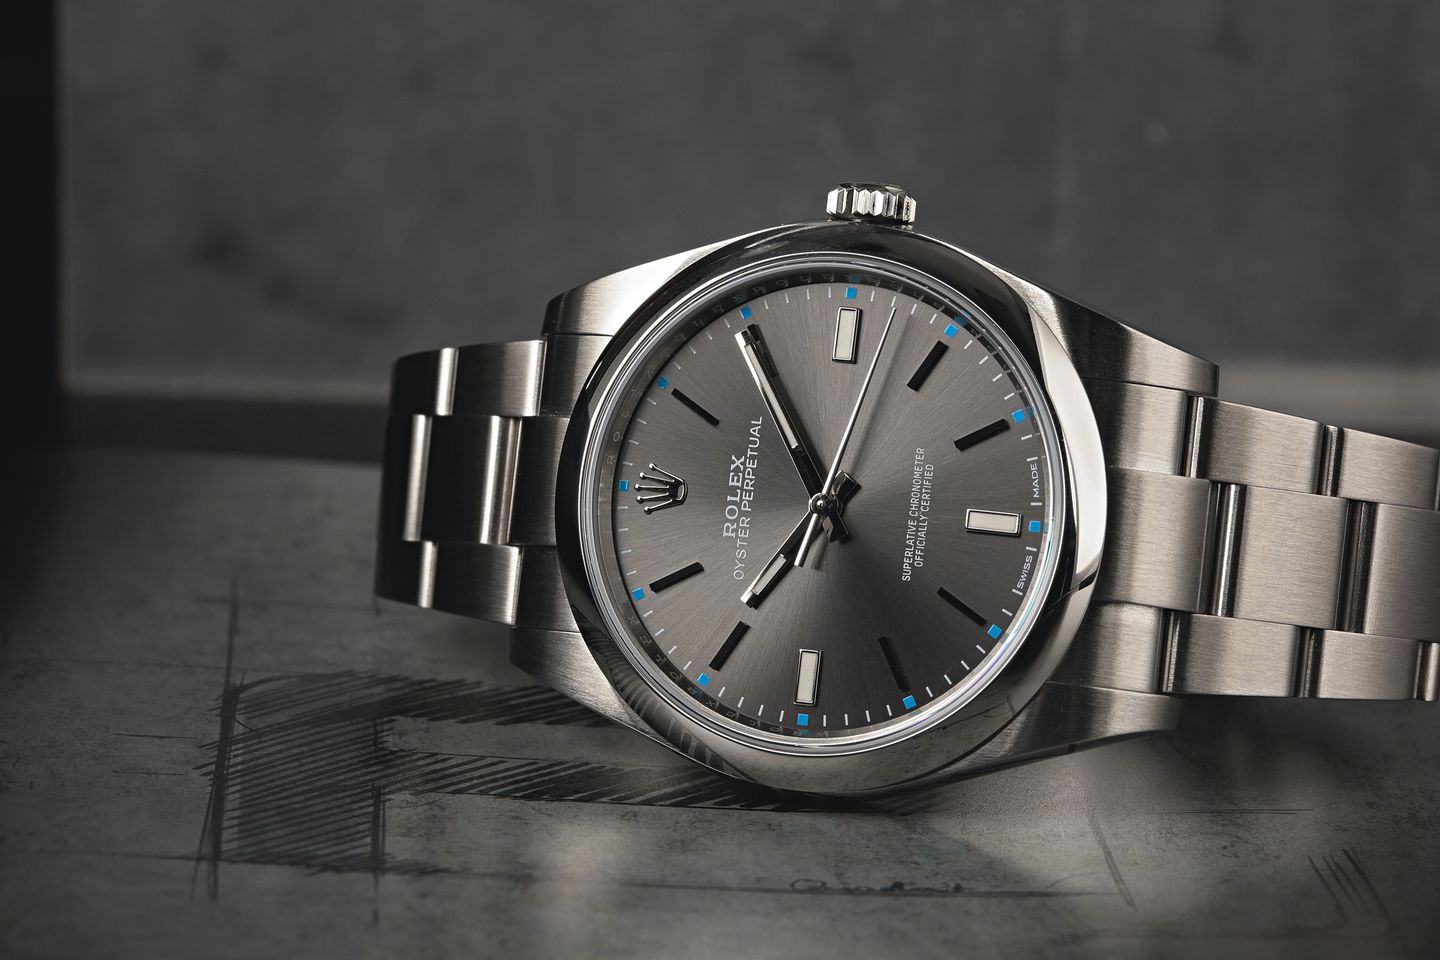 What Watch is the Rolex Oyster Perpetual?